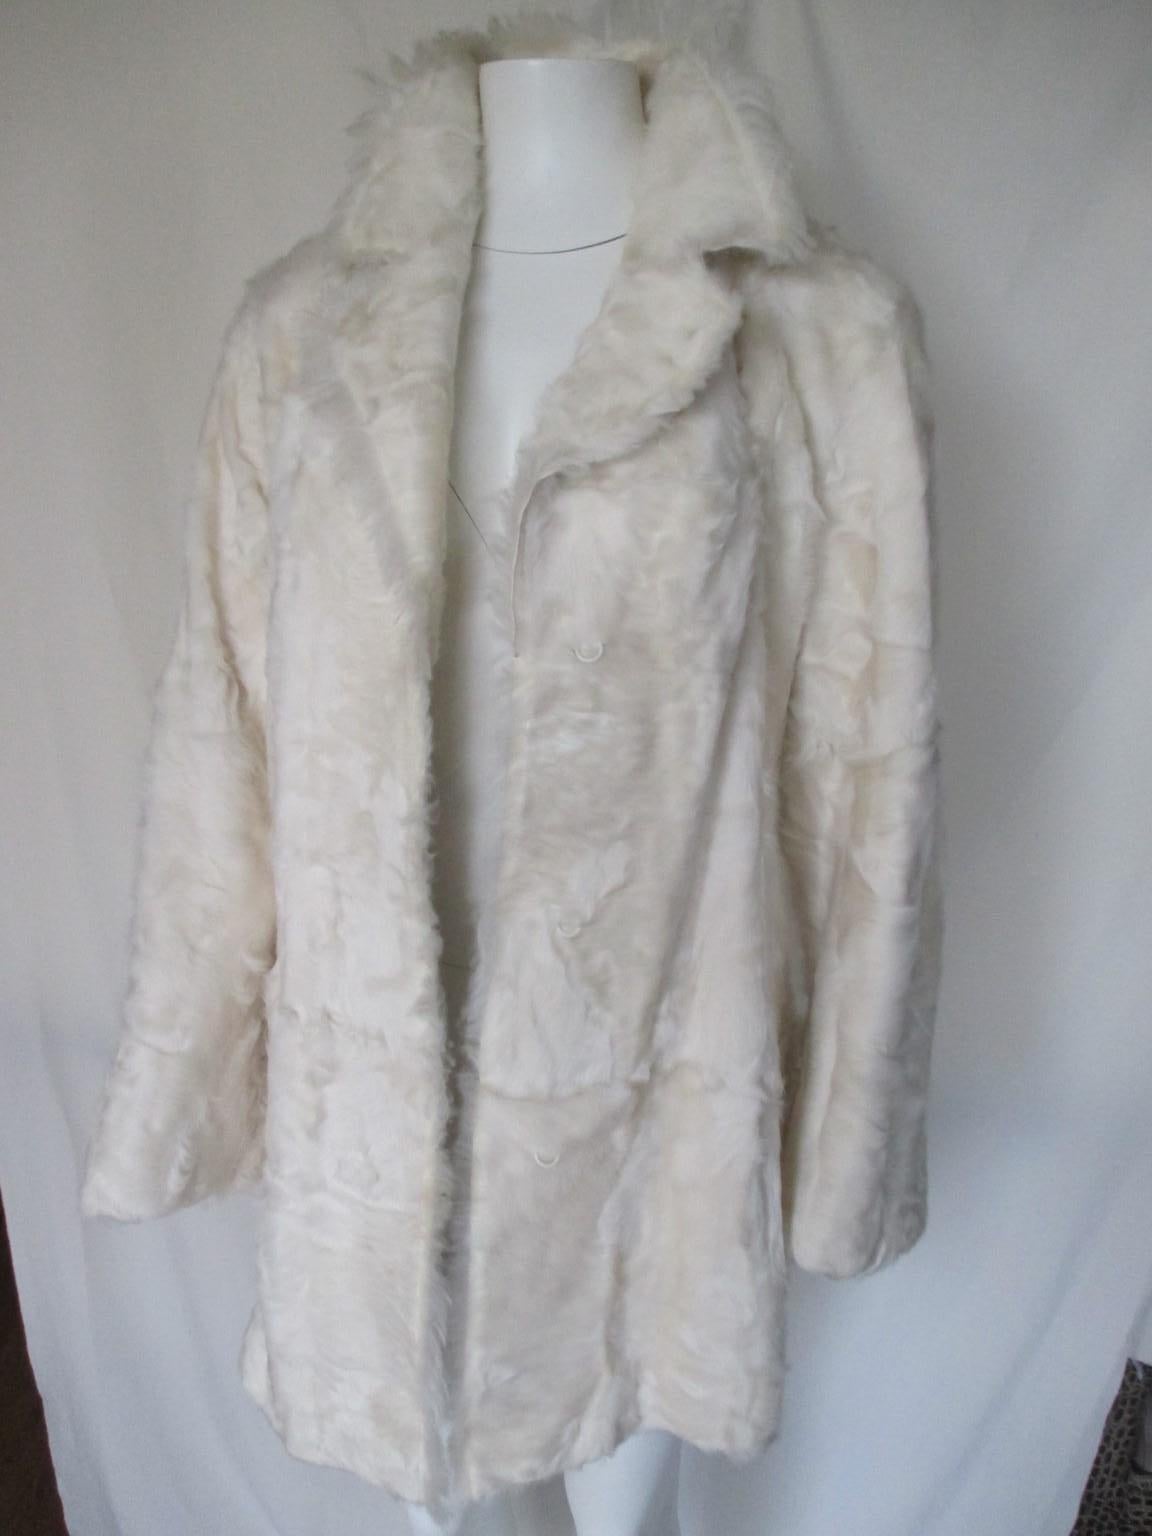 This exclusive vintage model is made of the finest naturel goat fur.

We offer more luxury fur items, view our frontstore.

Details:
Color: Ivory white
With 2 lined pockets and 3 closing hooks.
Fully lined
This fur is soft, shiny, supple and very